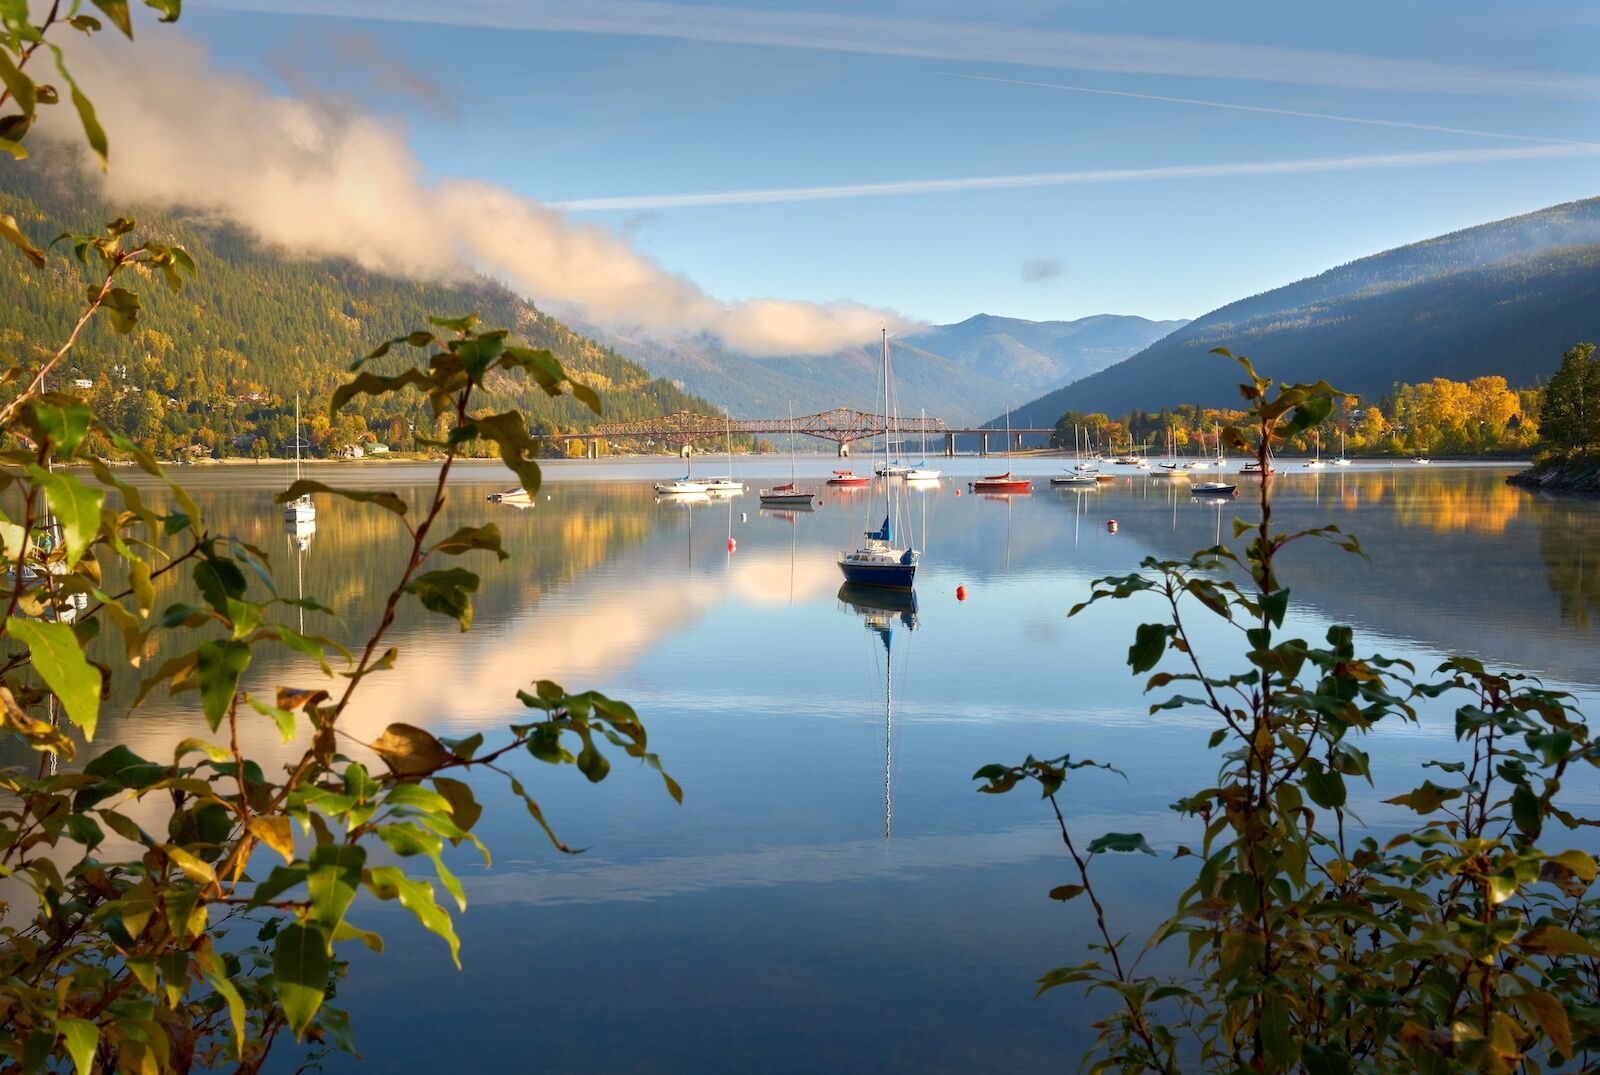 View of Kootenay Lake in Nelson, BC, Canada. Nelson is one of the most famous and most scenic Canadian small towns.